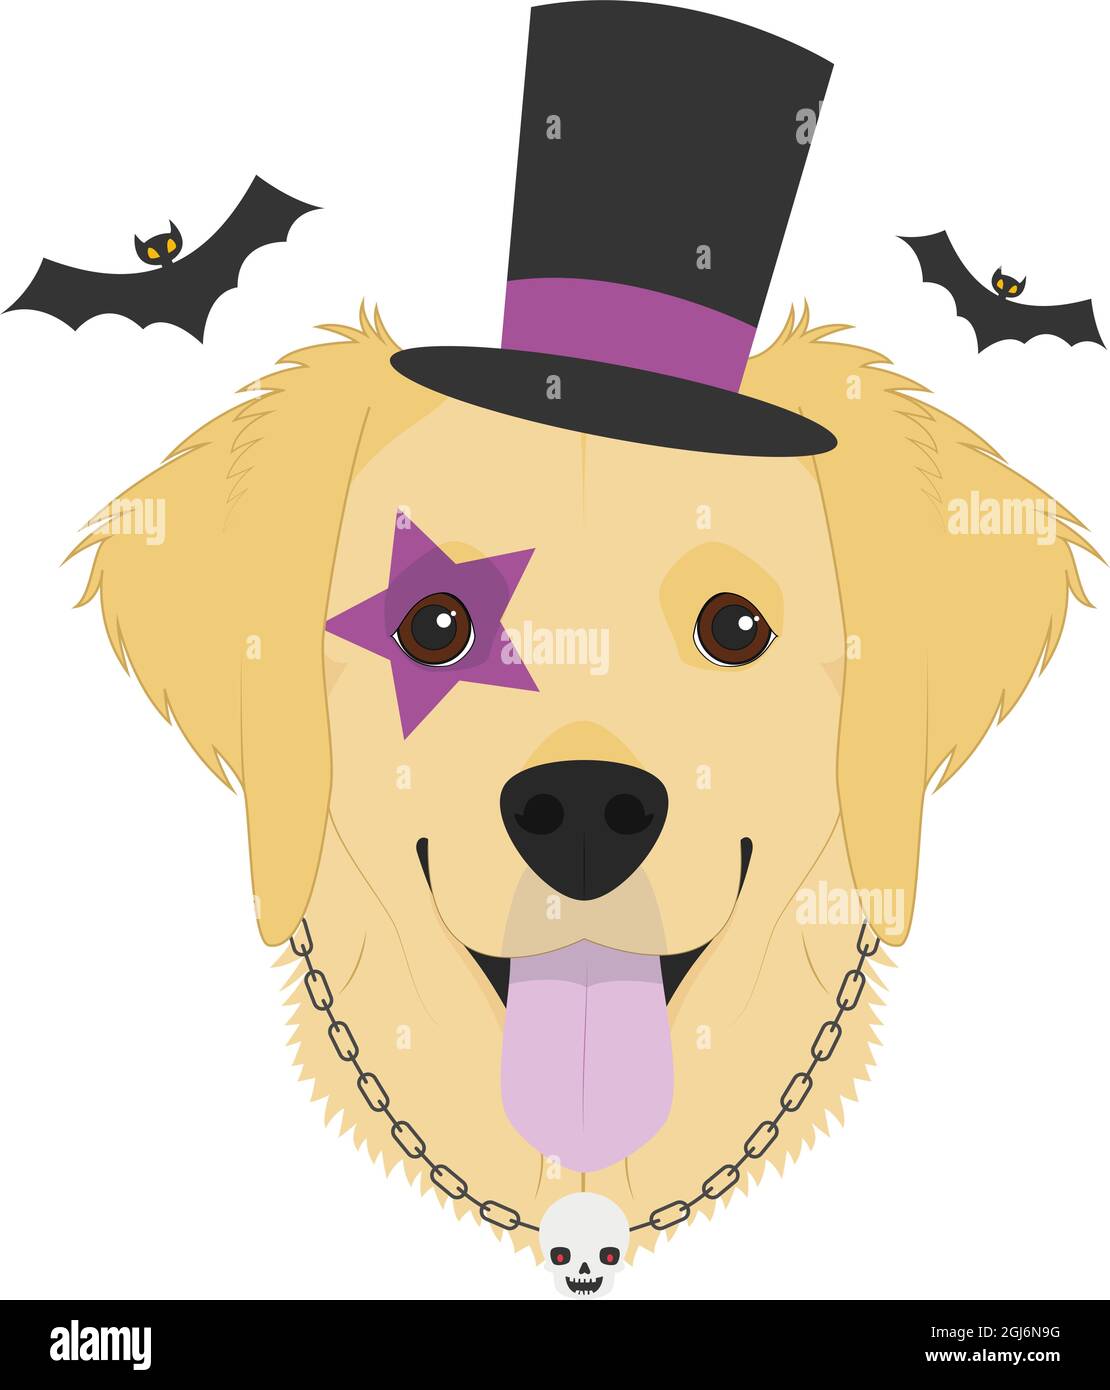 Halloween greeting card. Golden Retriever dog with top hat, chain necklace and a skull, and an eye tattoo Stock Vector